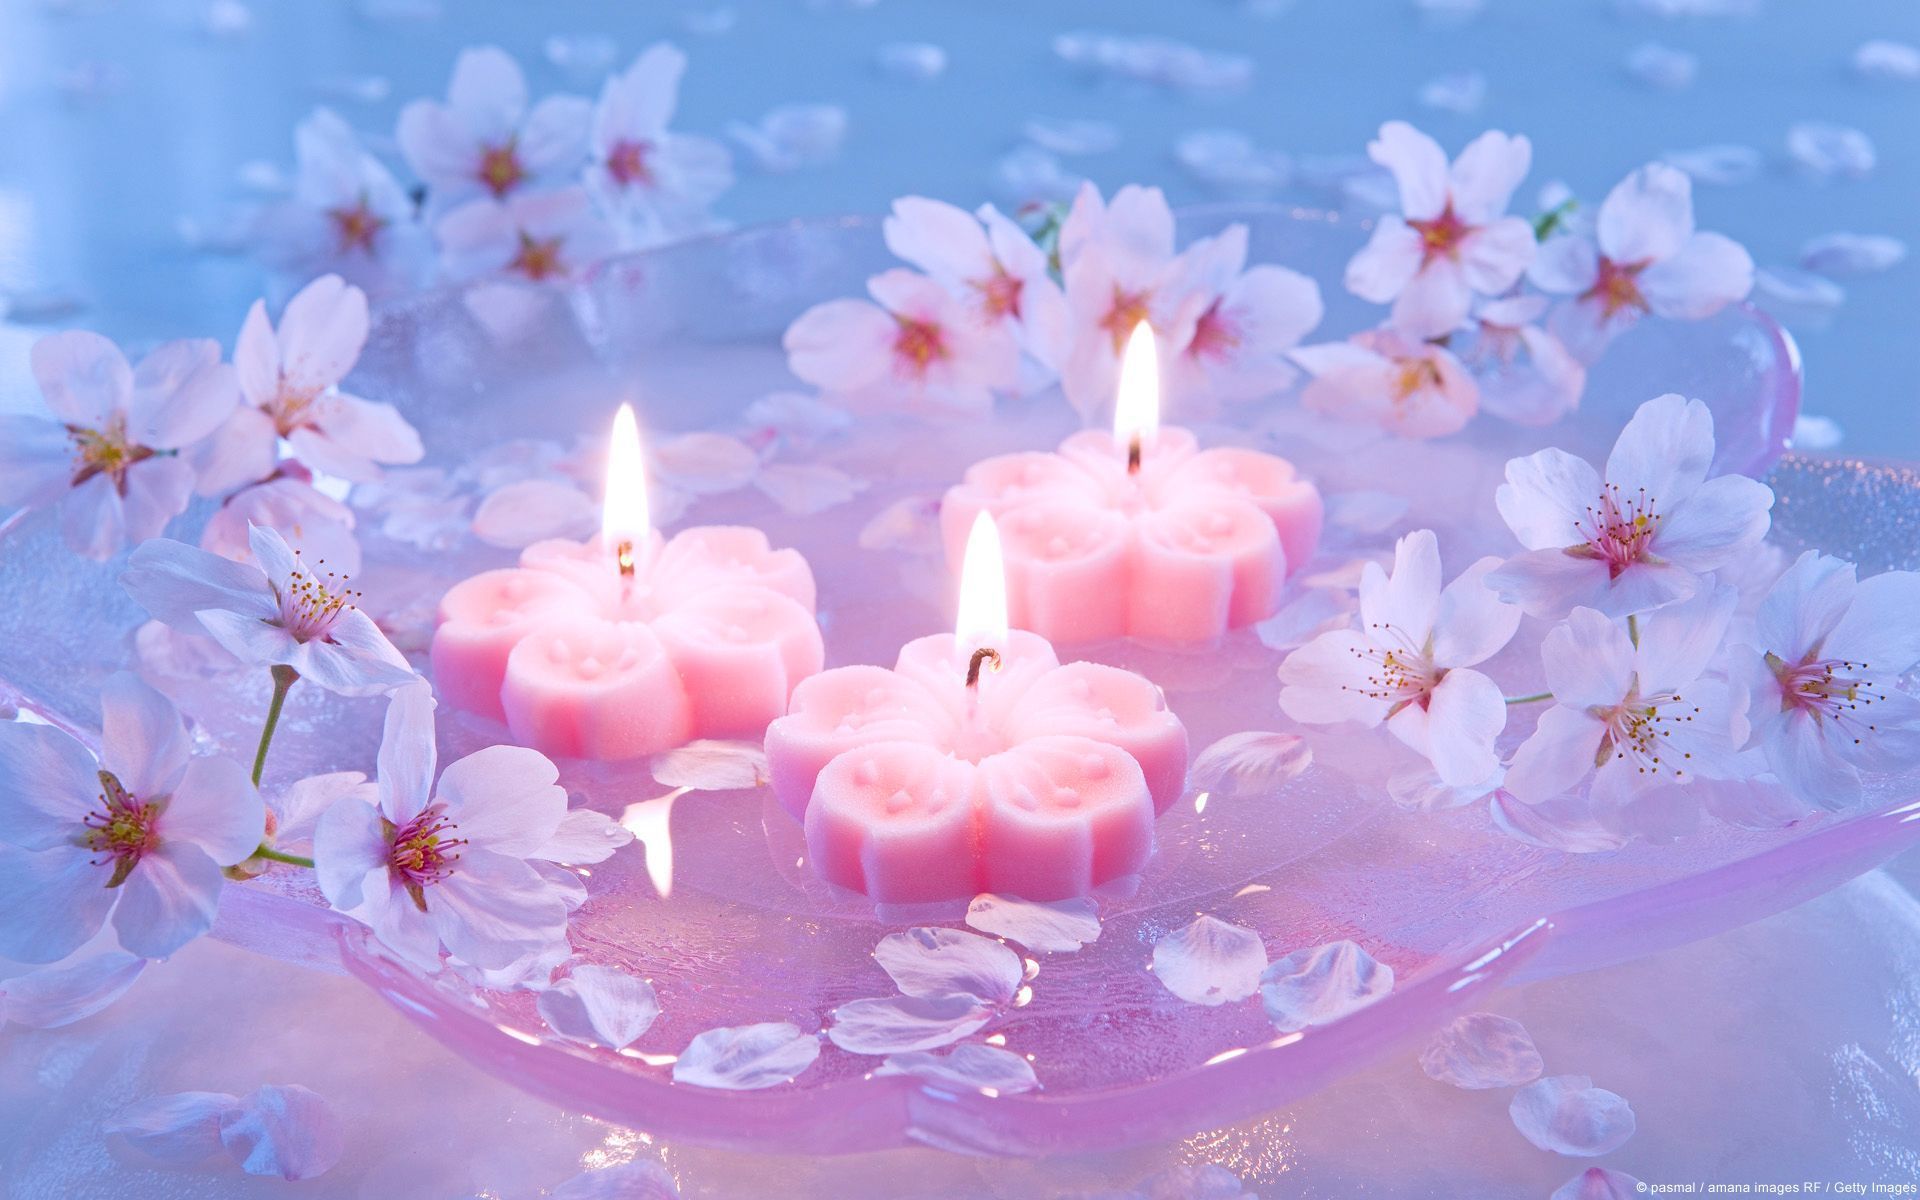 Candle Wallpaper Images, HD Pictures For Free Vectors Download - Lovepik.com